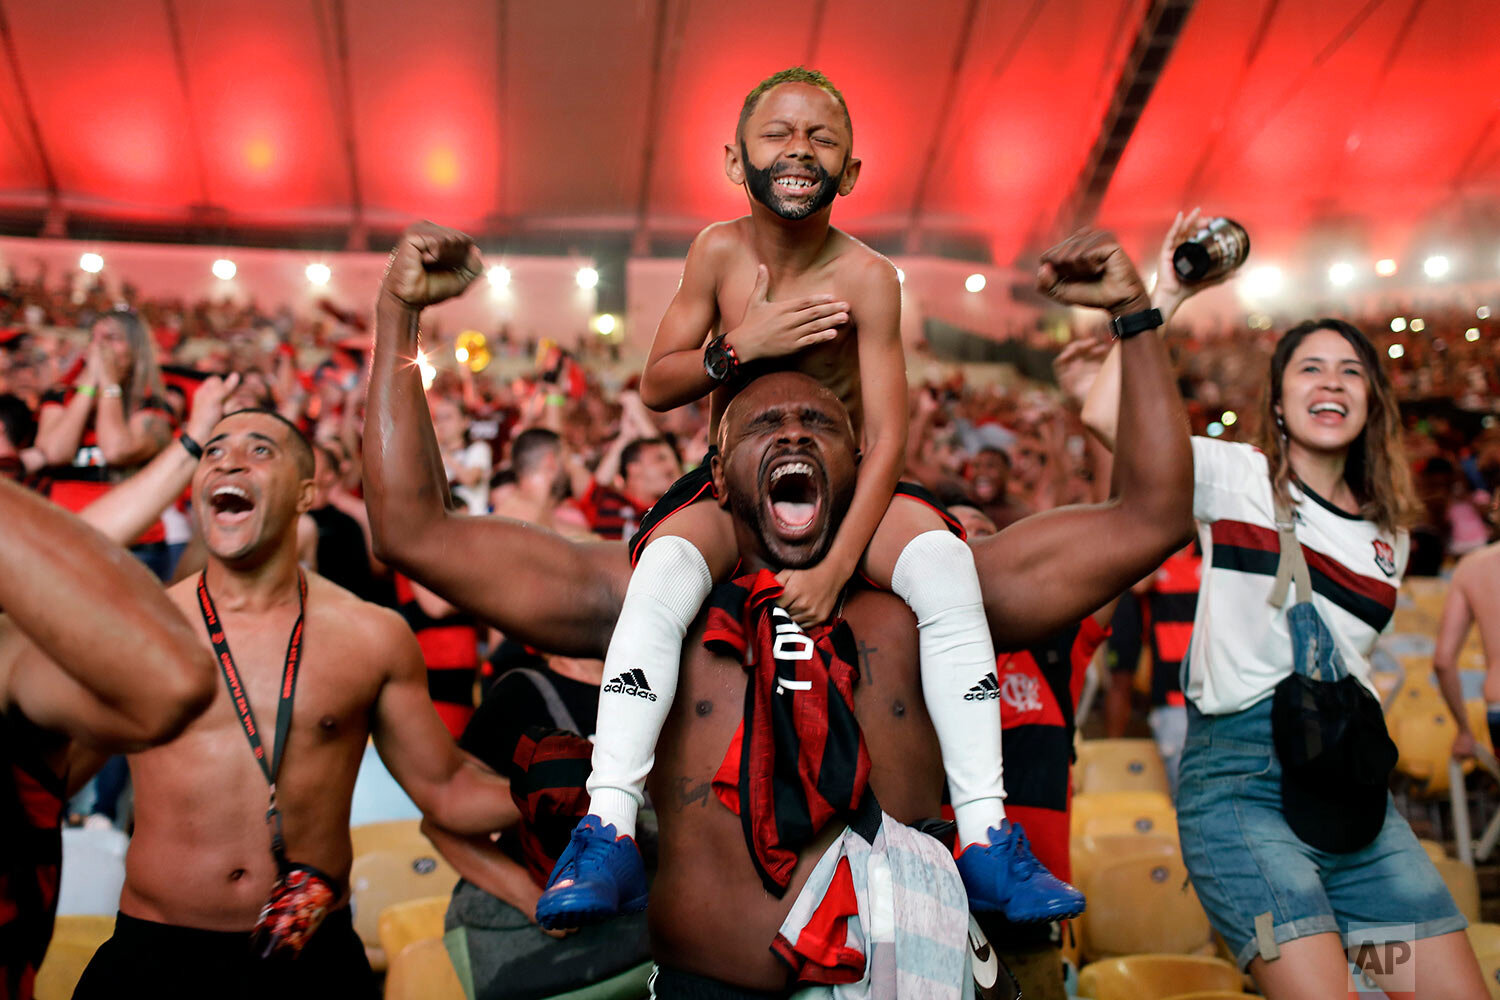  Flamengo soccer fans cheer a goal scored by Gabriel against Argentina's River Plate in the Copa Libertadores final match, broadcast on a giant screen at a watch party at the Maracanã Stadium, in Rio de Janeiro, Brazil, on Nov. 23, 2019. (AP Photo/Si